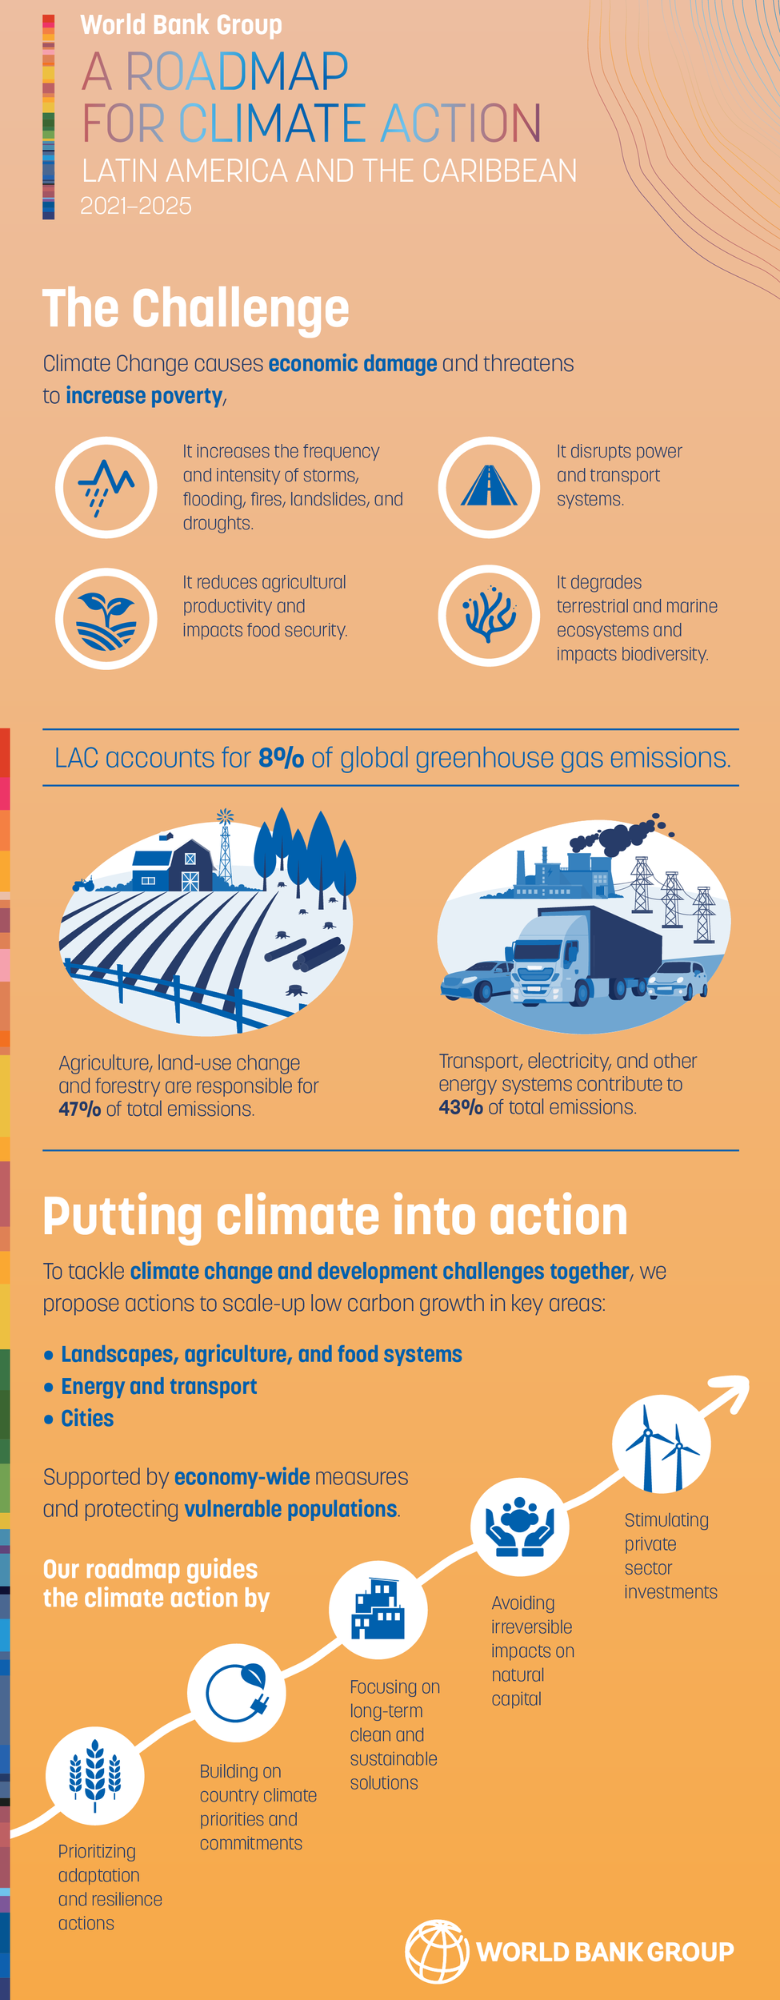 Climate Action Roadmap for Latin America and the Caribbean